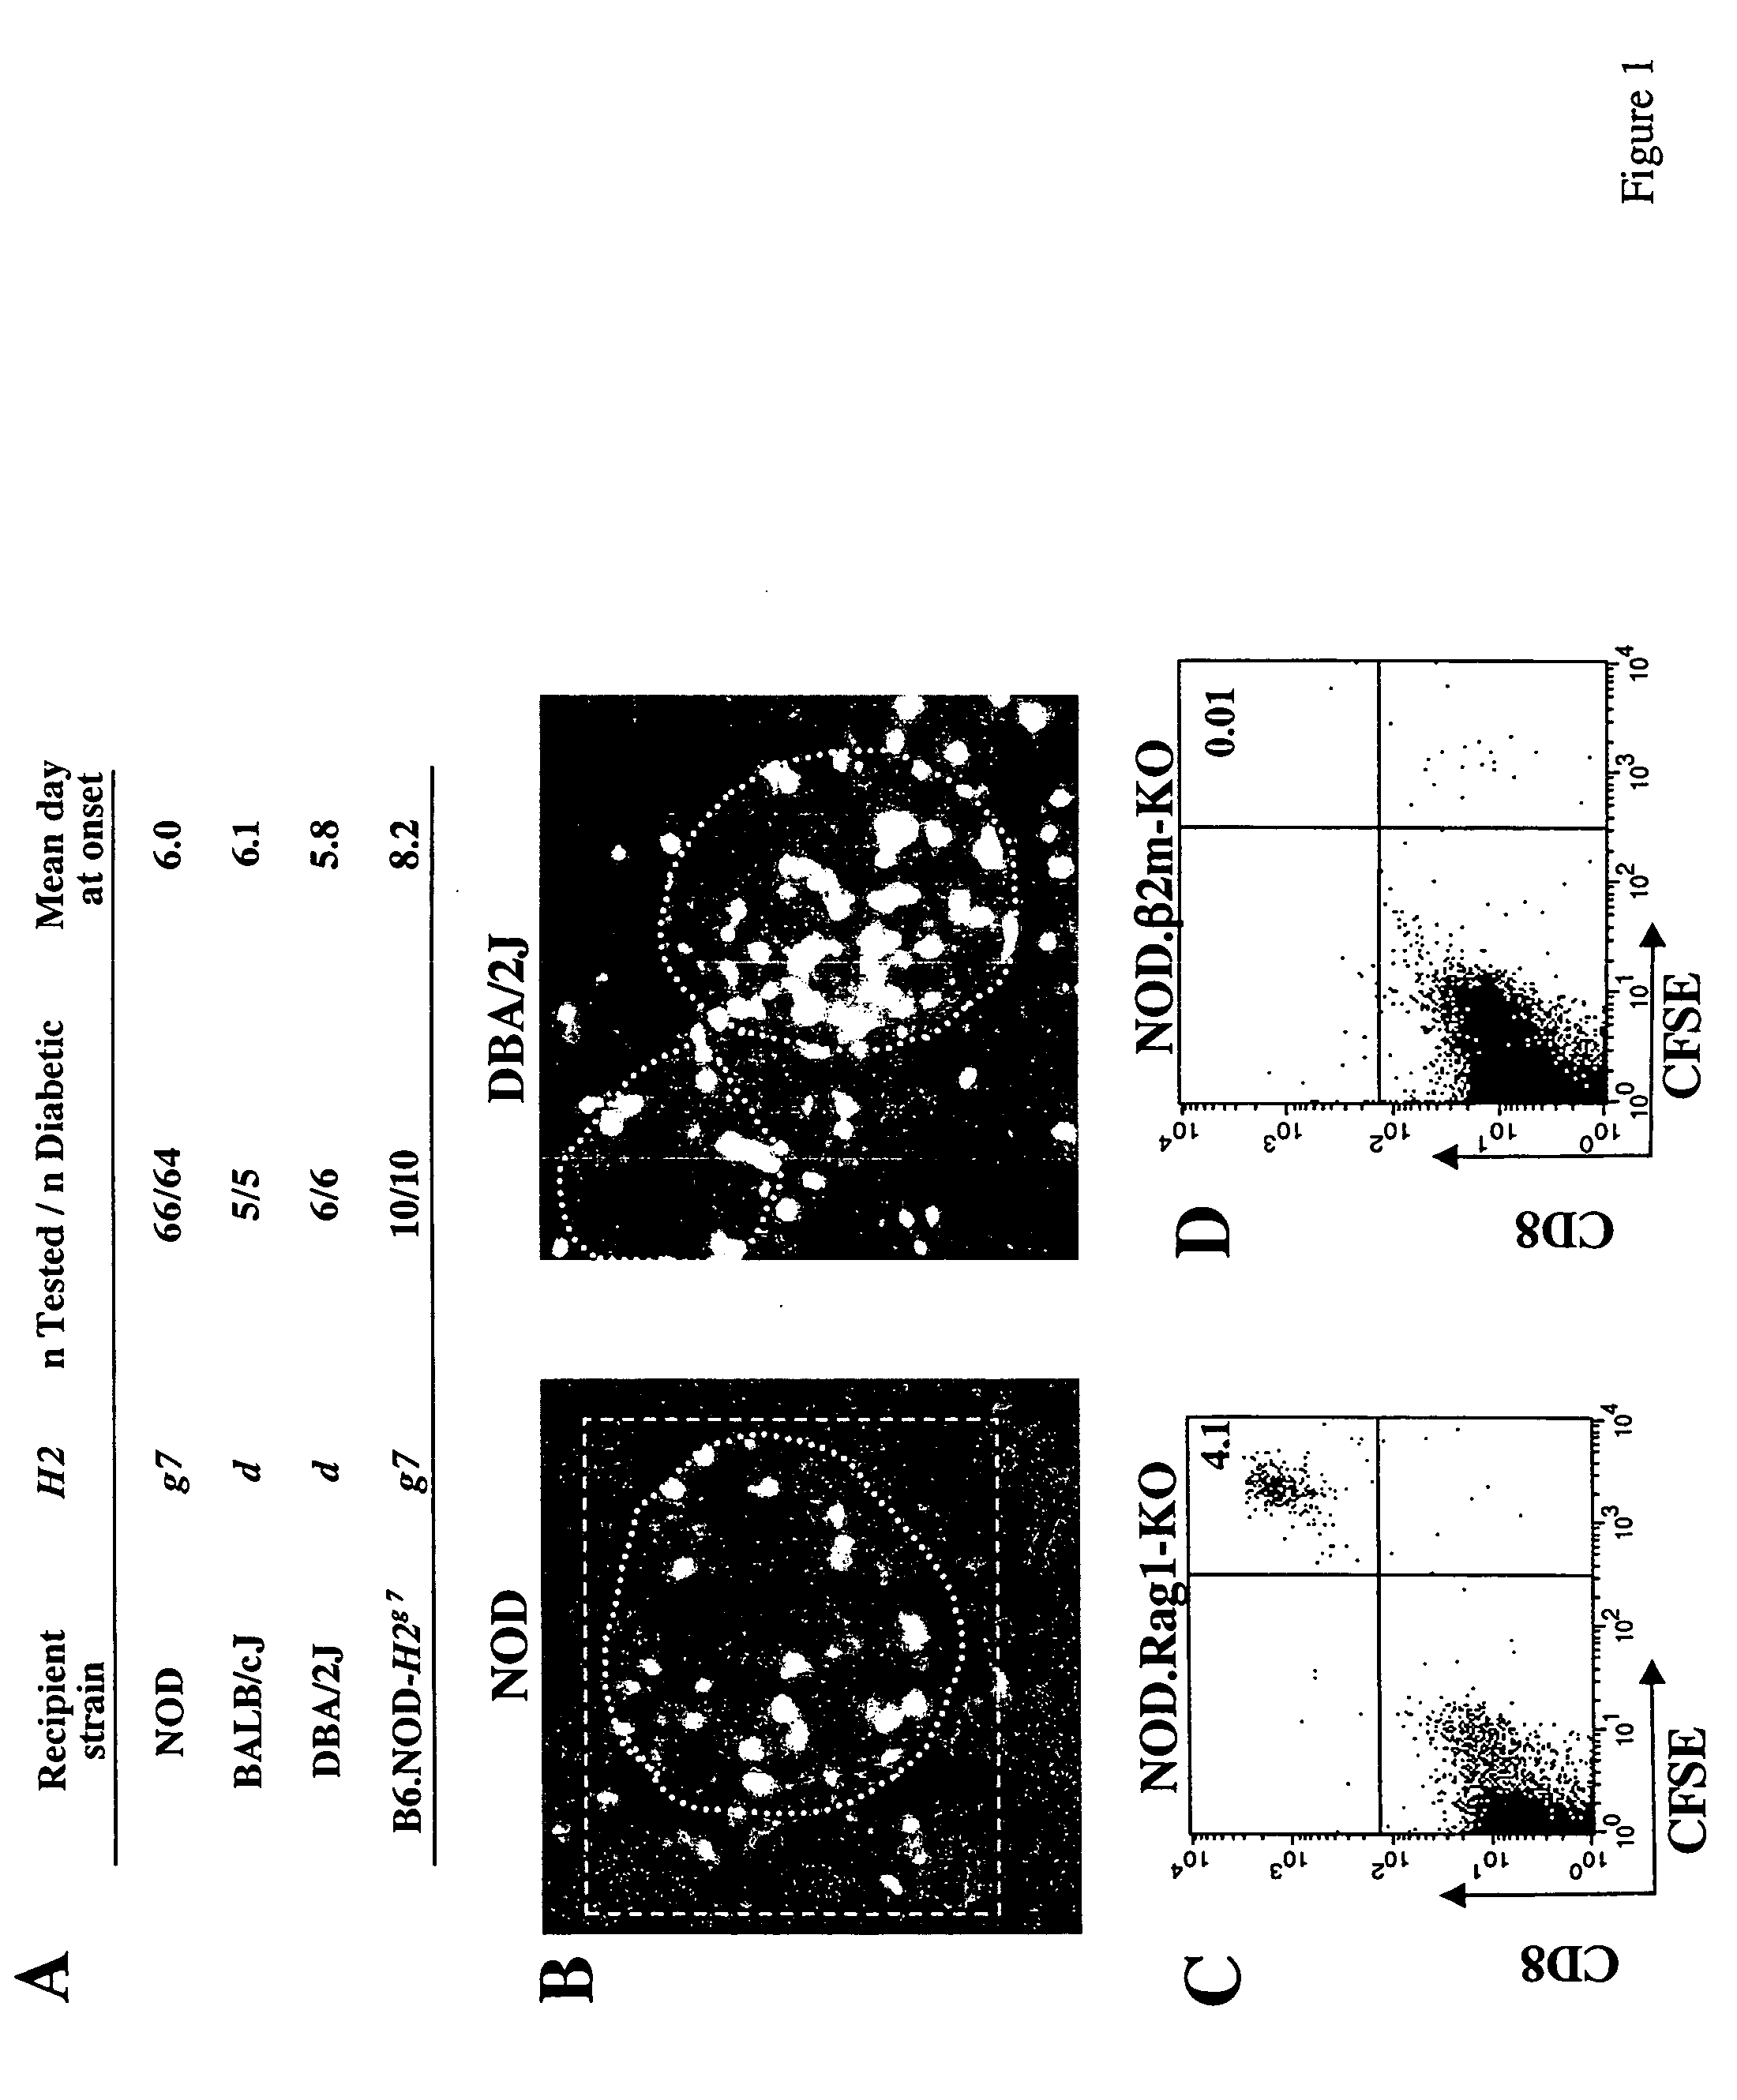 Methods of modulating homing of T cell by interruption of chemokine/chemokine receptor signaling